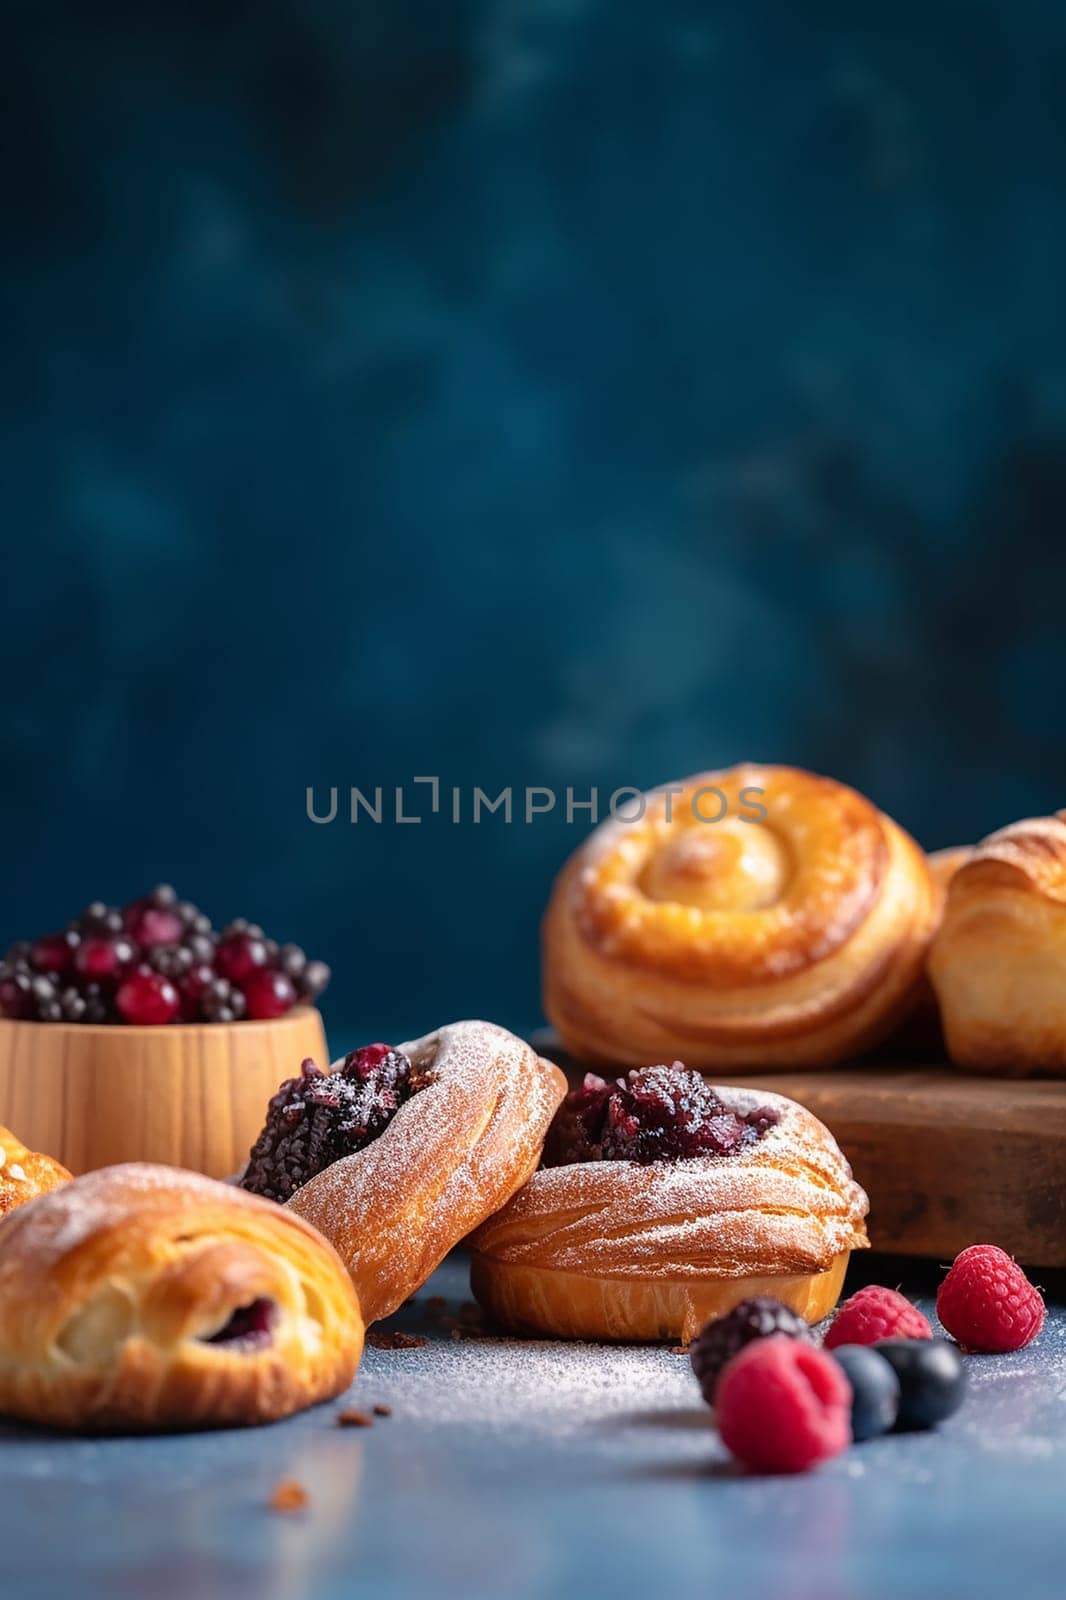 Assorted sweet pastries with berries on a dark background